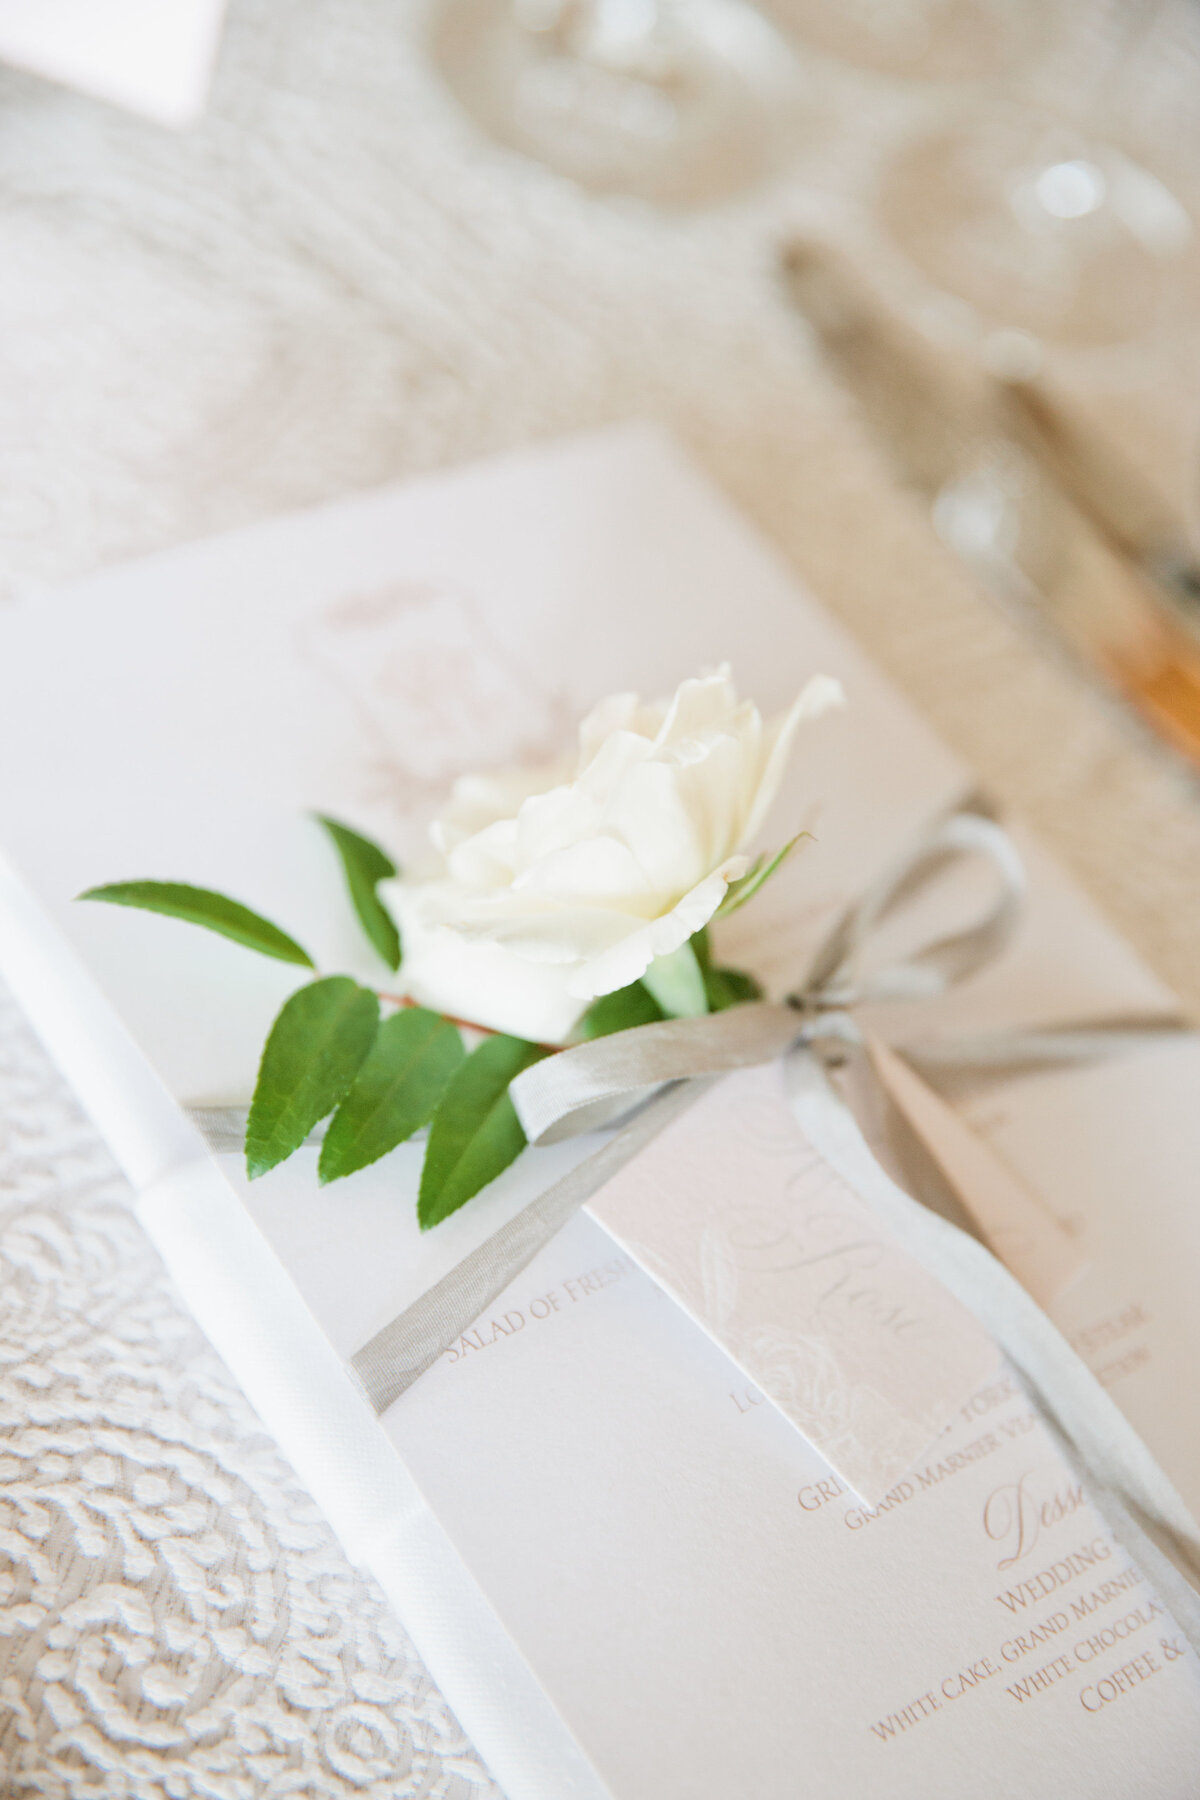 Menu cards with hand tags and floral sprigs